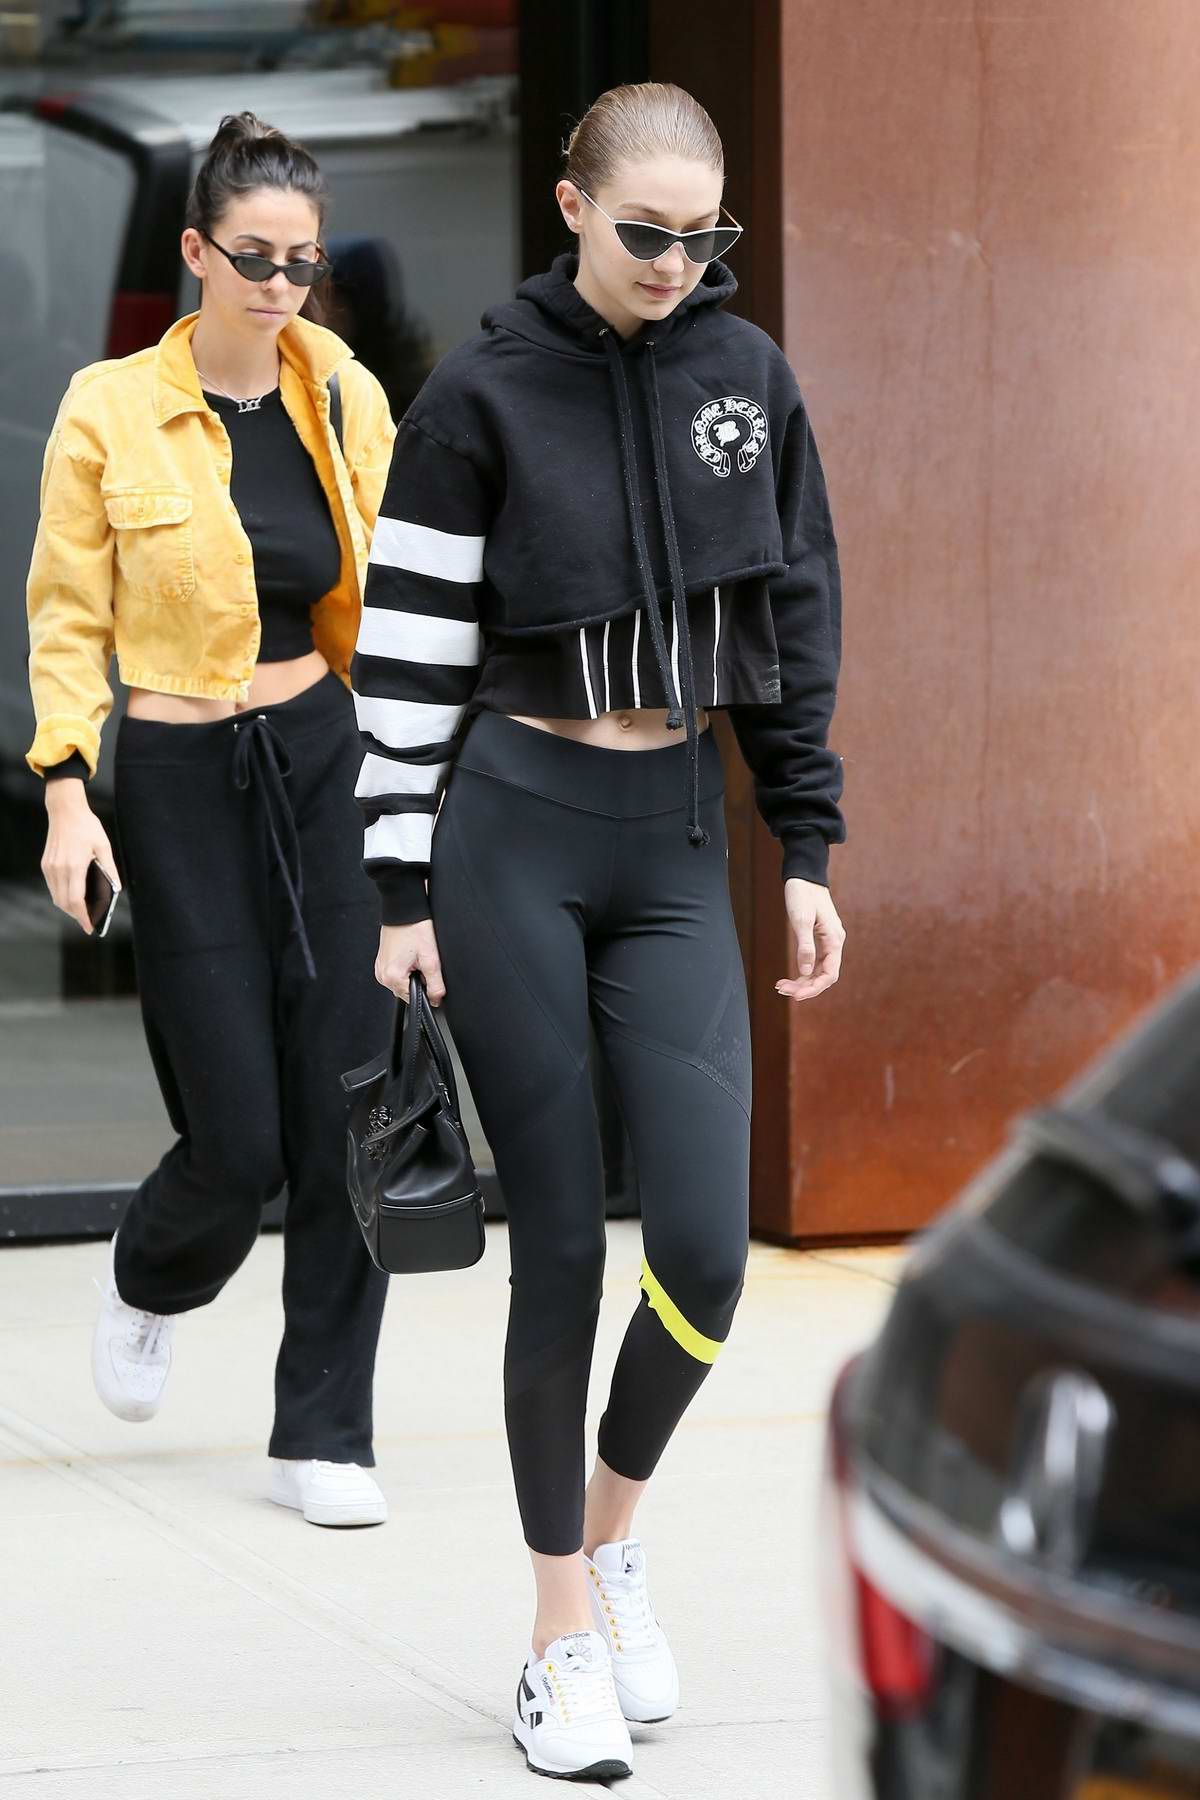 gigi hadid dons an all black outfit with a versace bag as she heads out in  new york city-090318_4